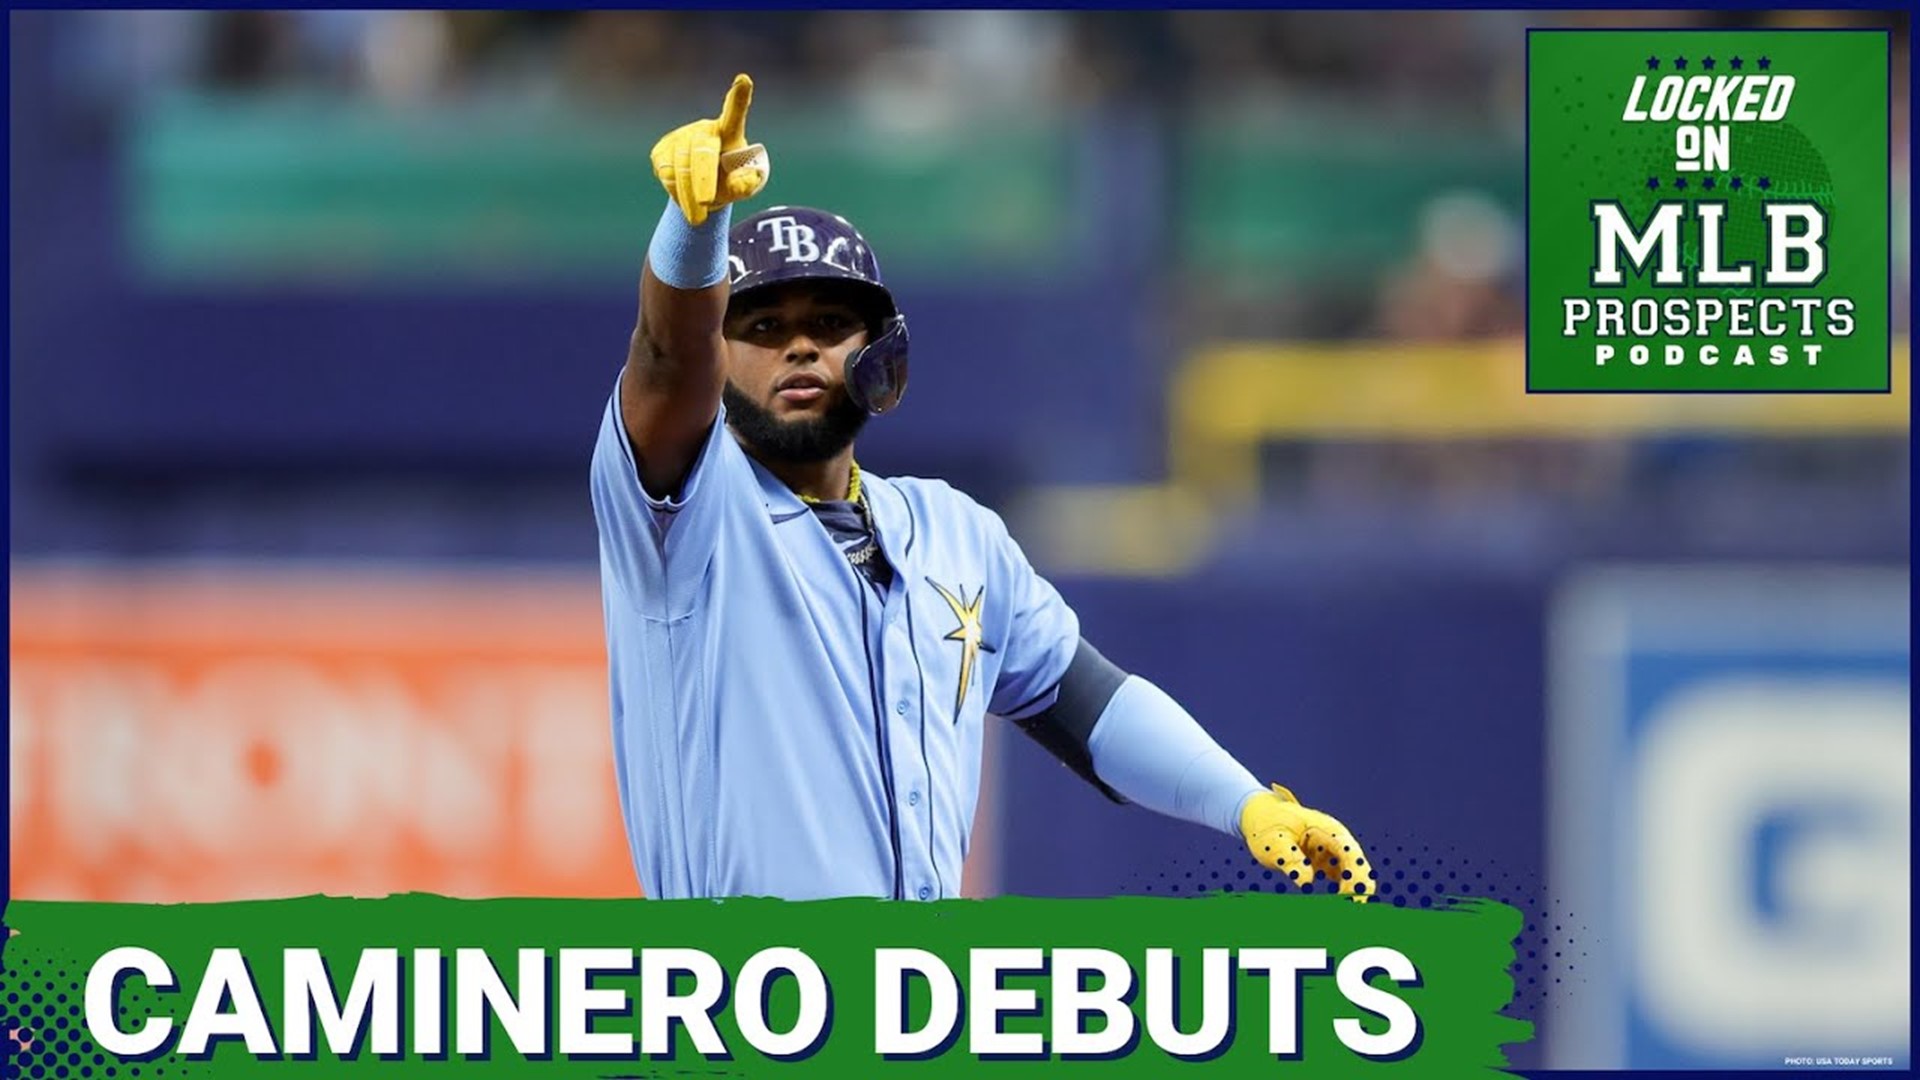 In the first segment, Lindsay explores the exciting promotion of Junior Caminero to the Tampa Bay Rays and why he has the potential to be a very special hitter.